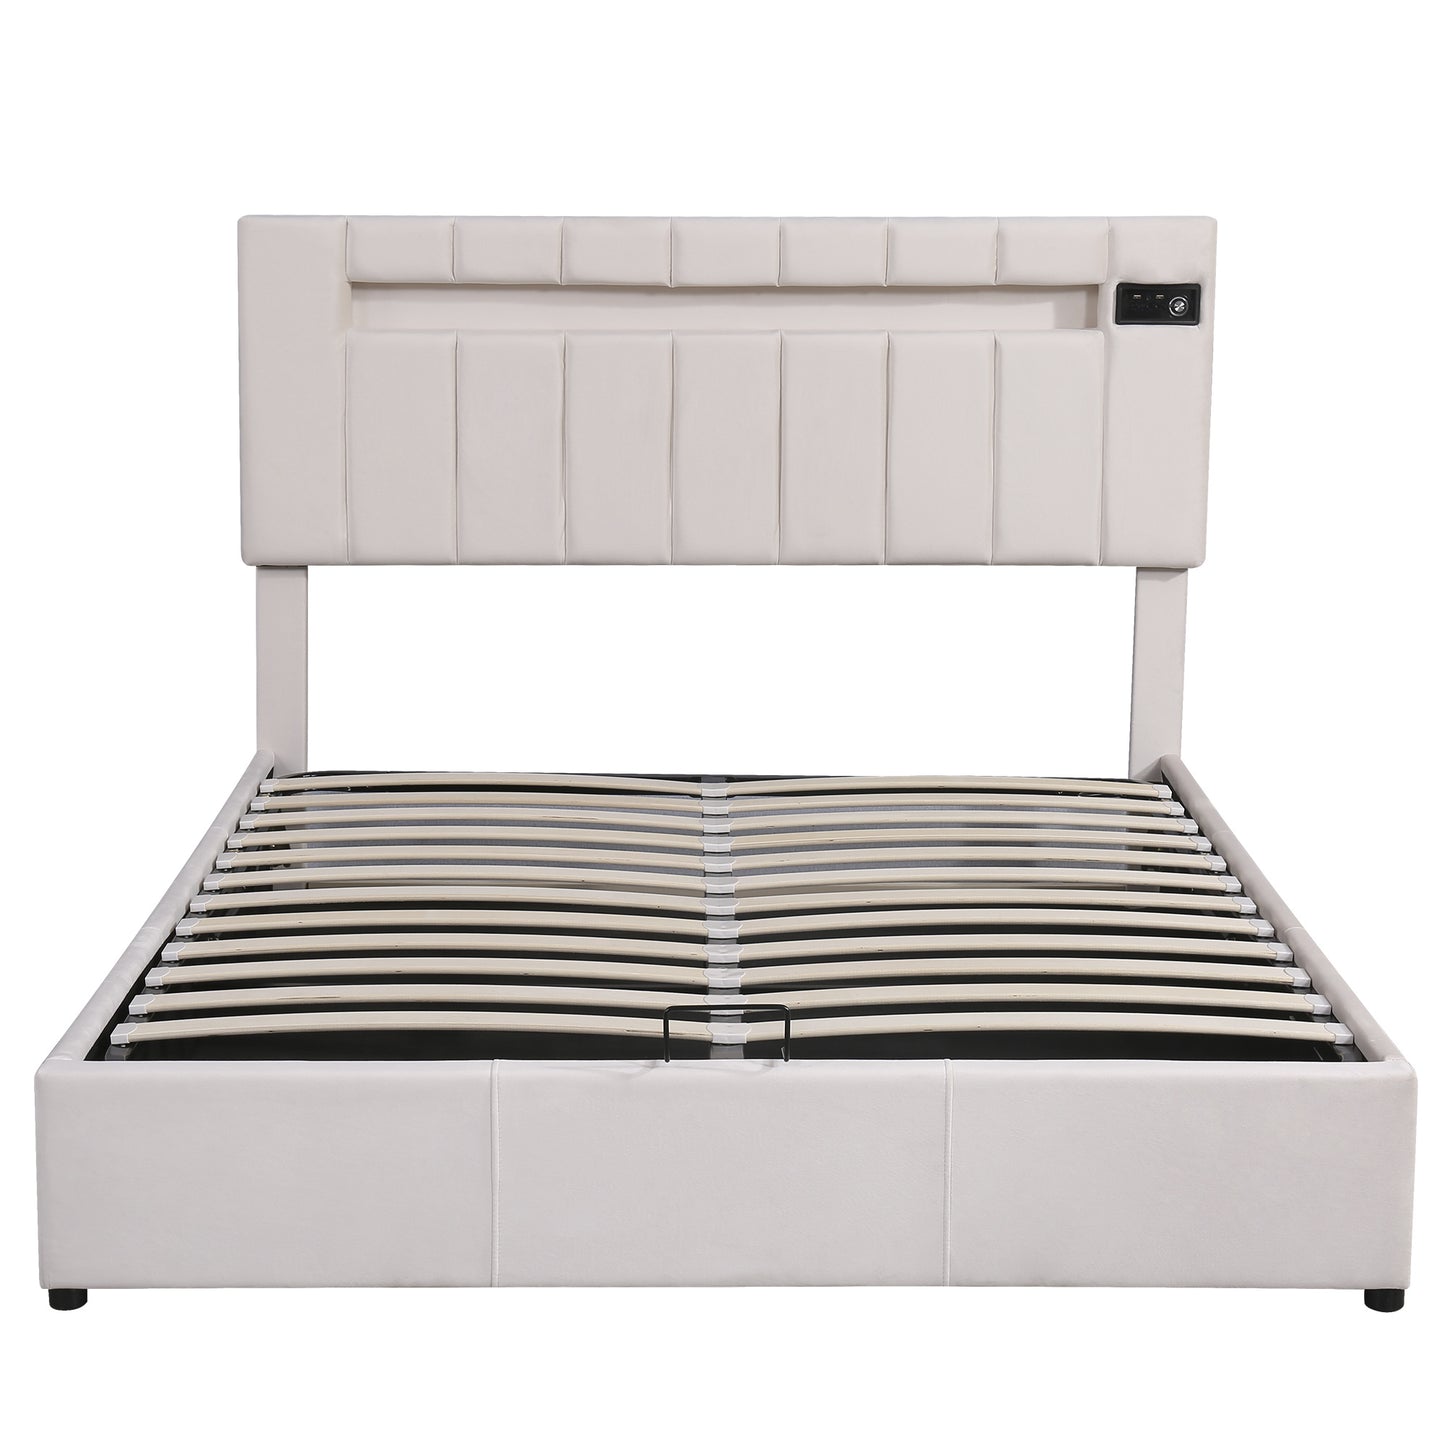 Upholstered Bed Queen Size with LED light;  Bluetooth Player and USB Charging;  Hydraulic Storage Bed in  Velvet Fabric